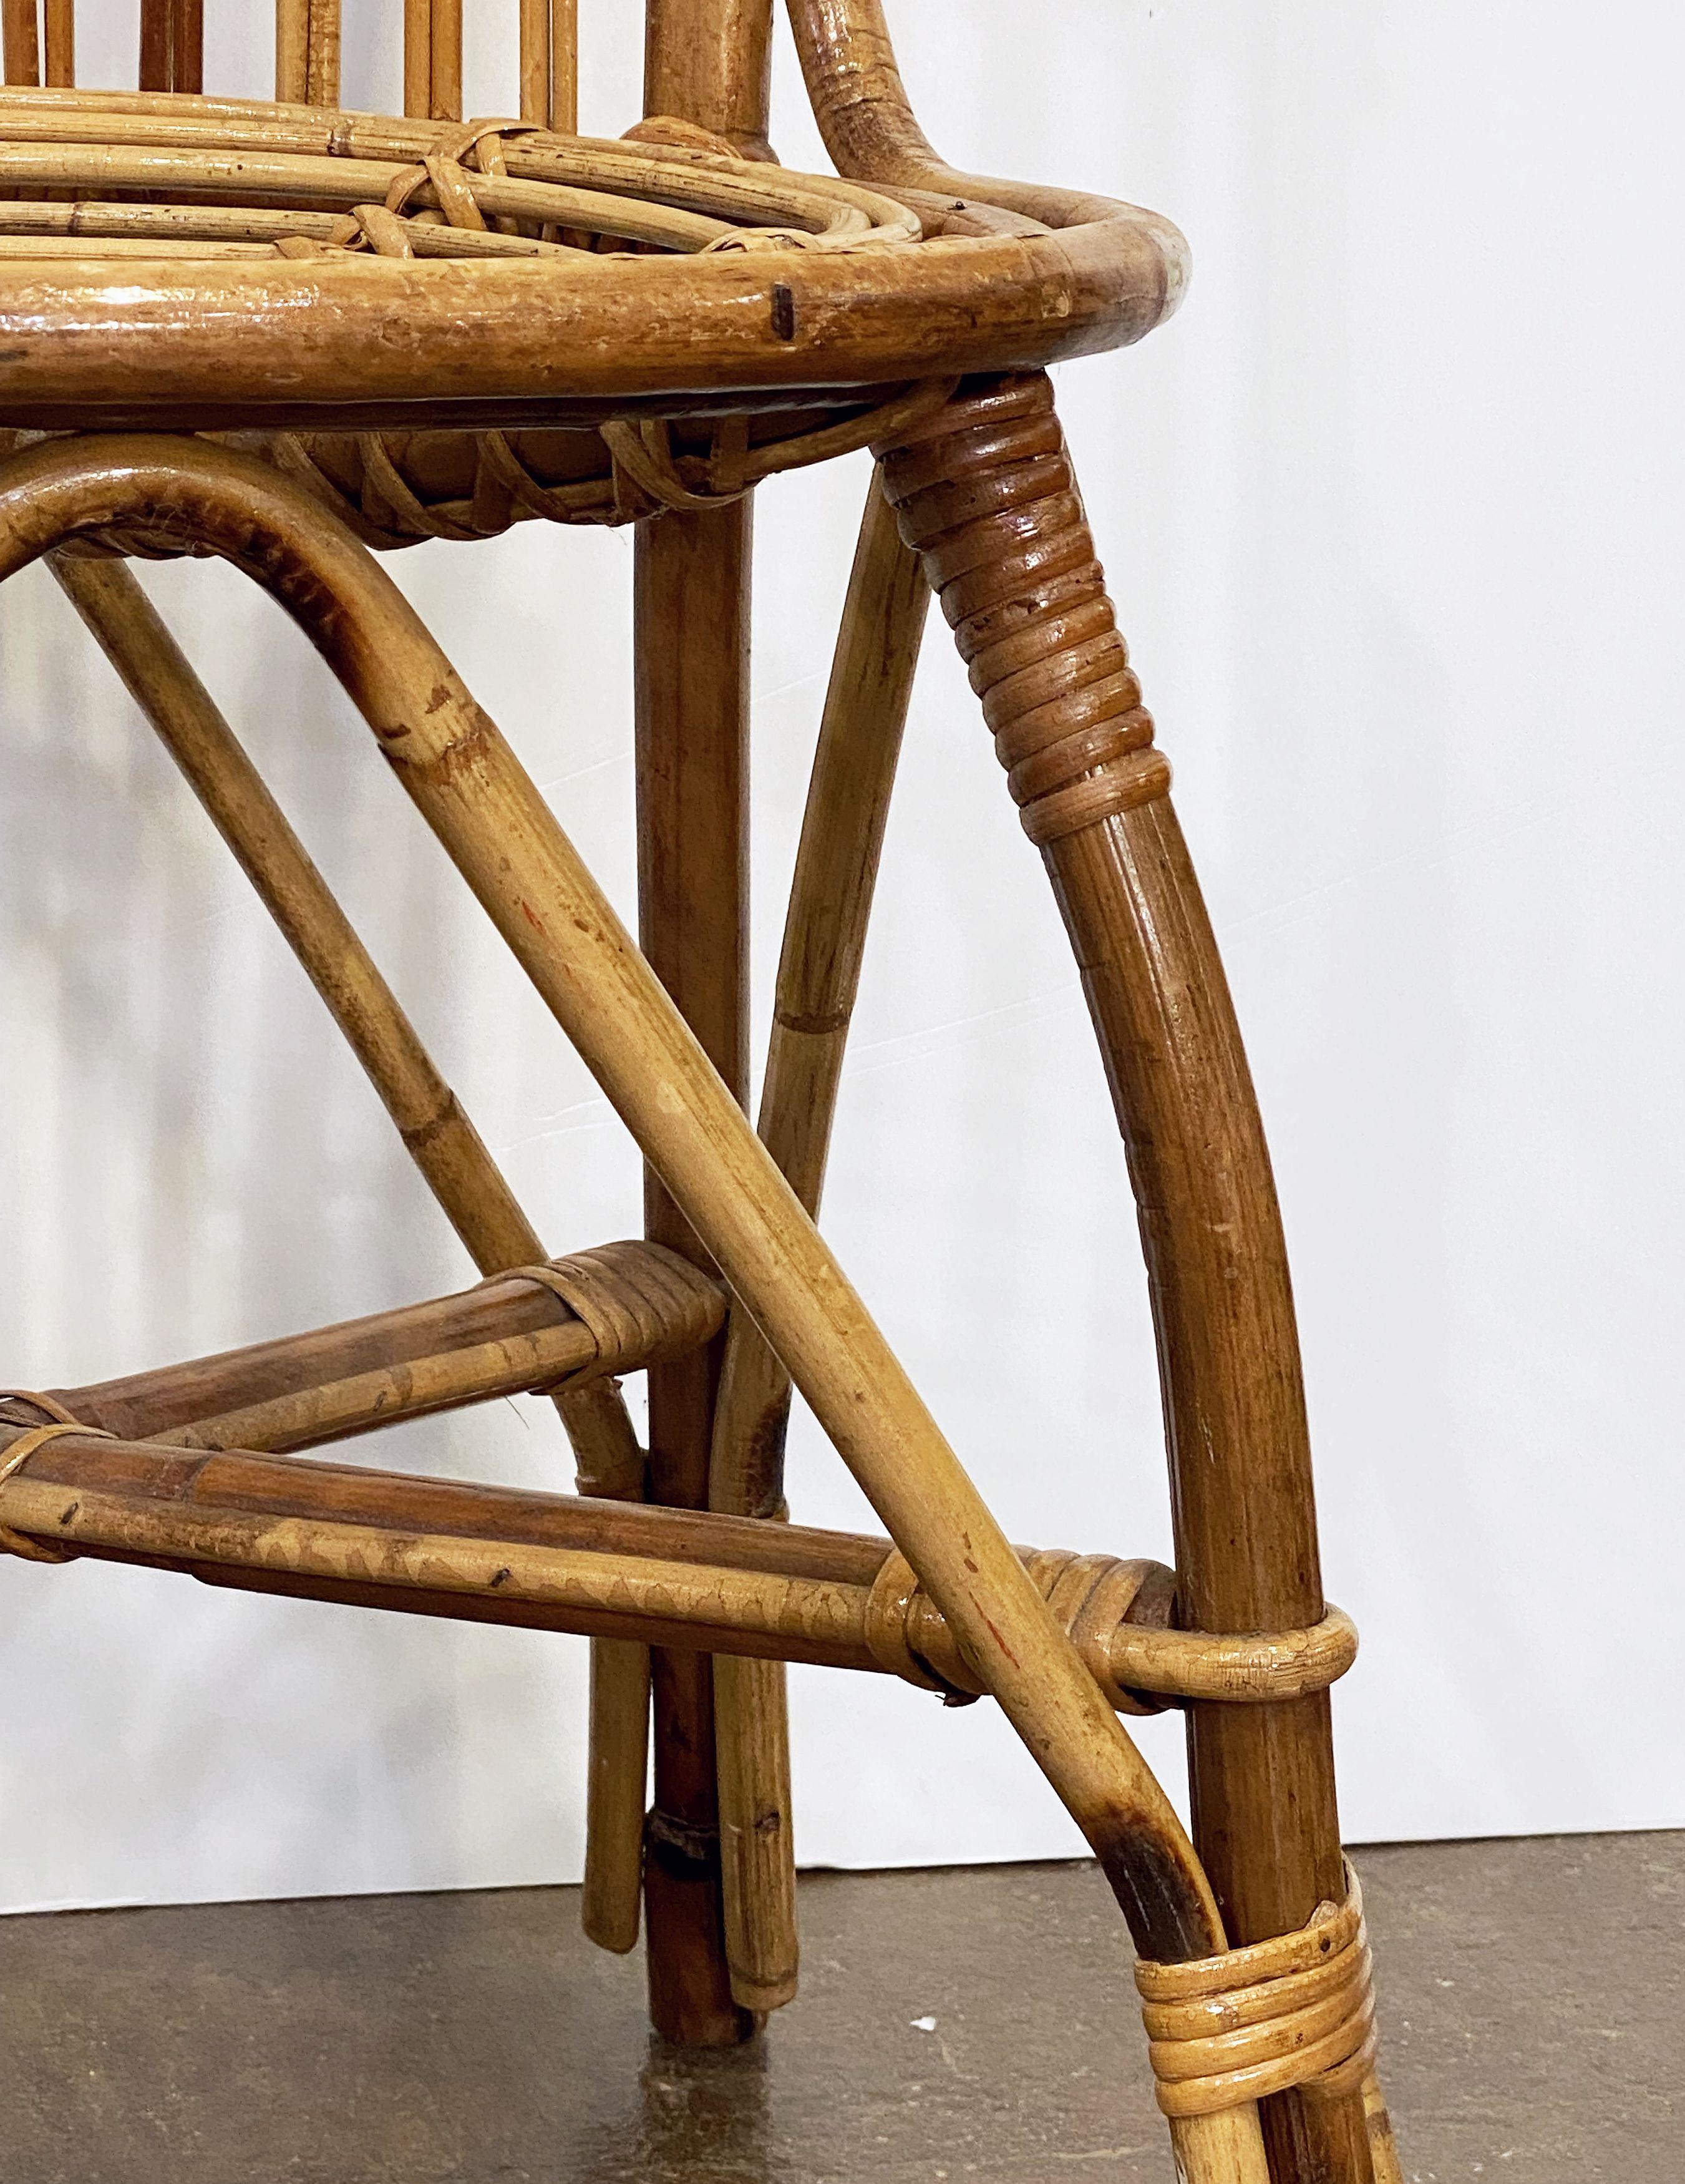 Italian Fan-Backed Chair of Rattan and Bamboo from the Mid-20th Century For Sale 10